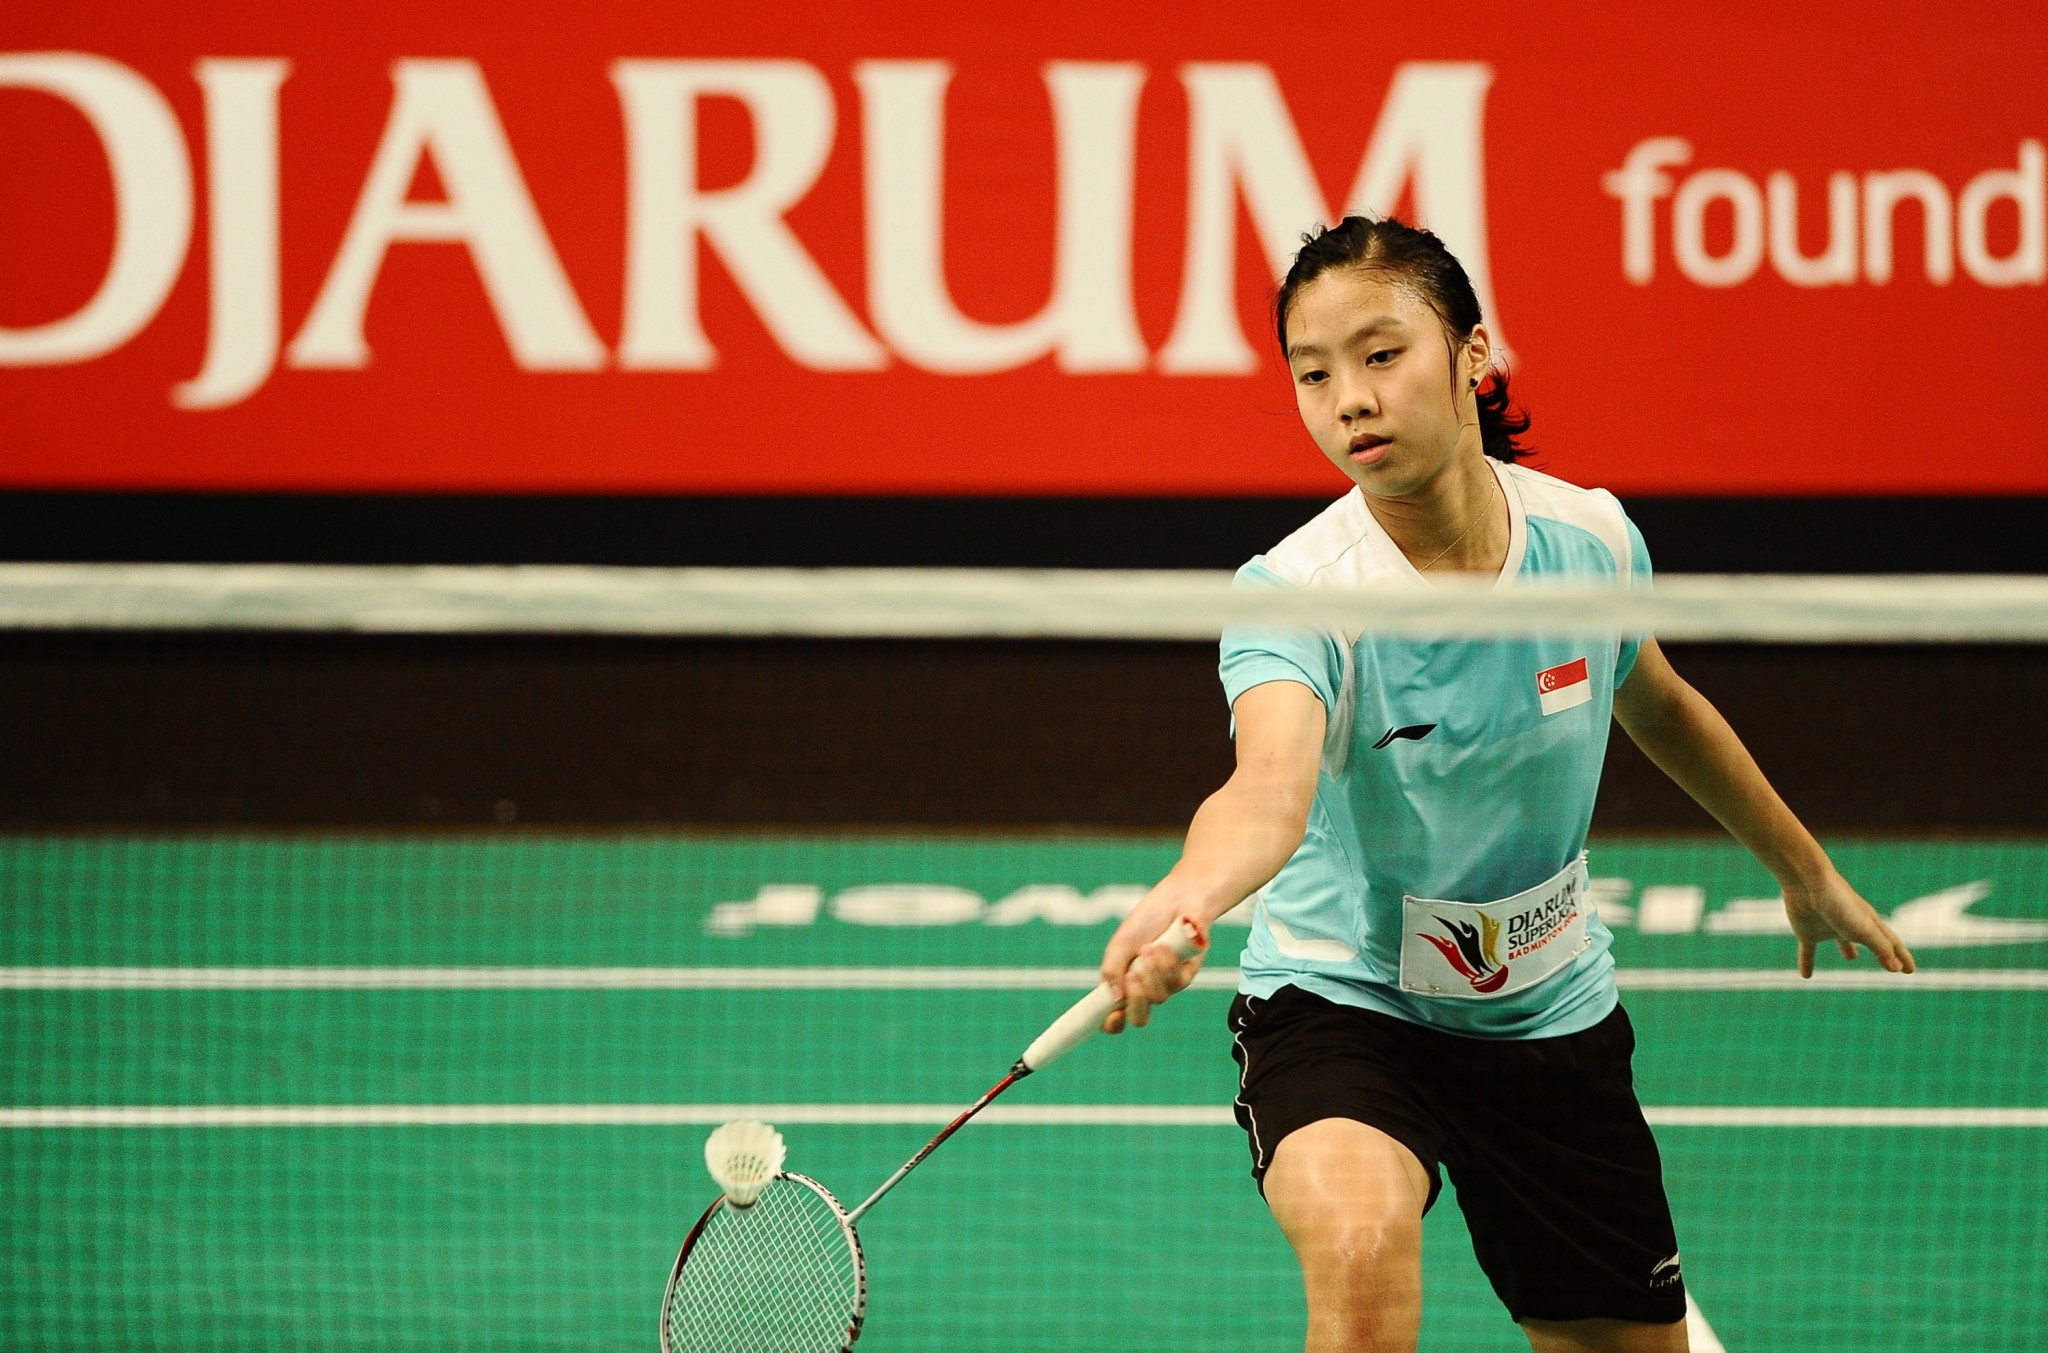 Zhou upsets second seed in women's singles event at BWF World Junior Championships